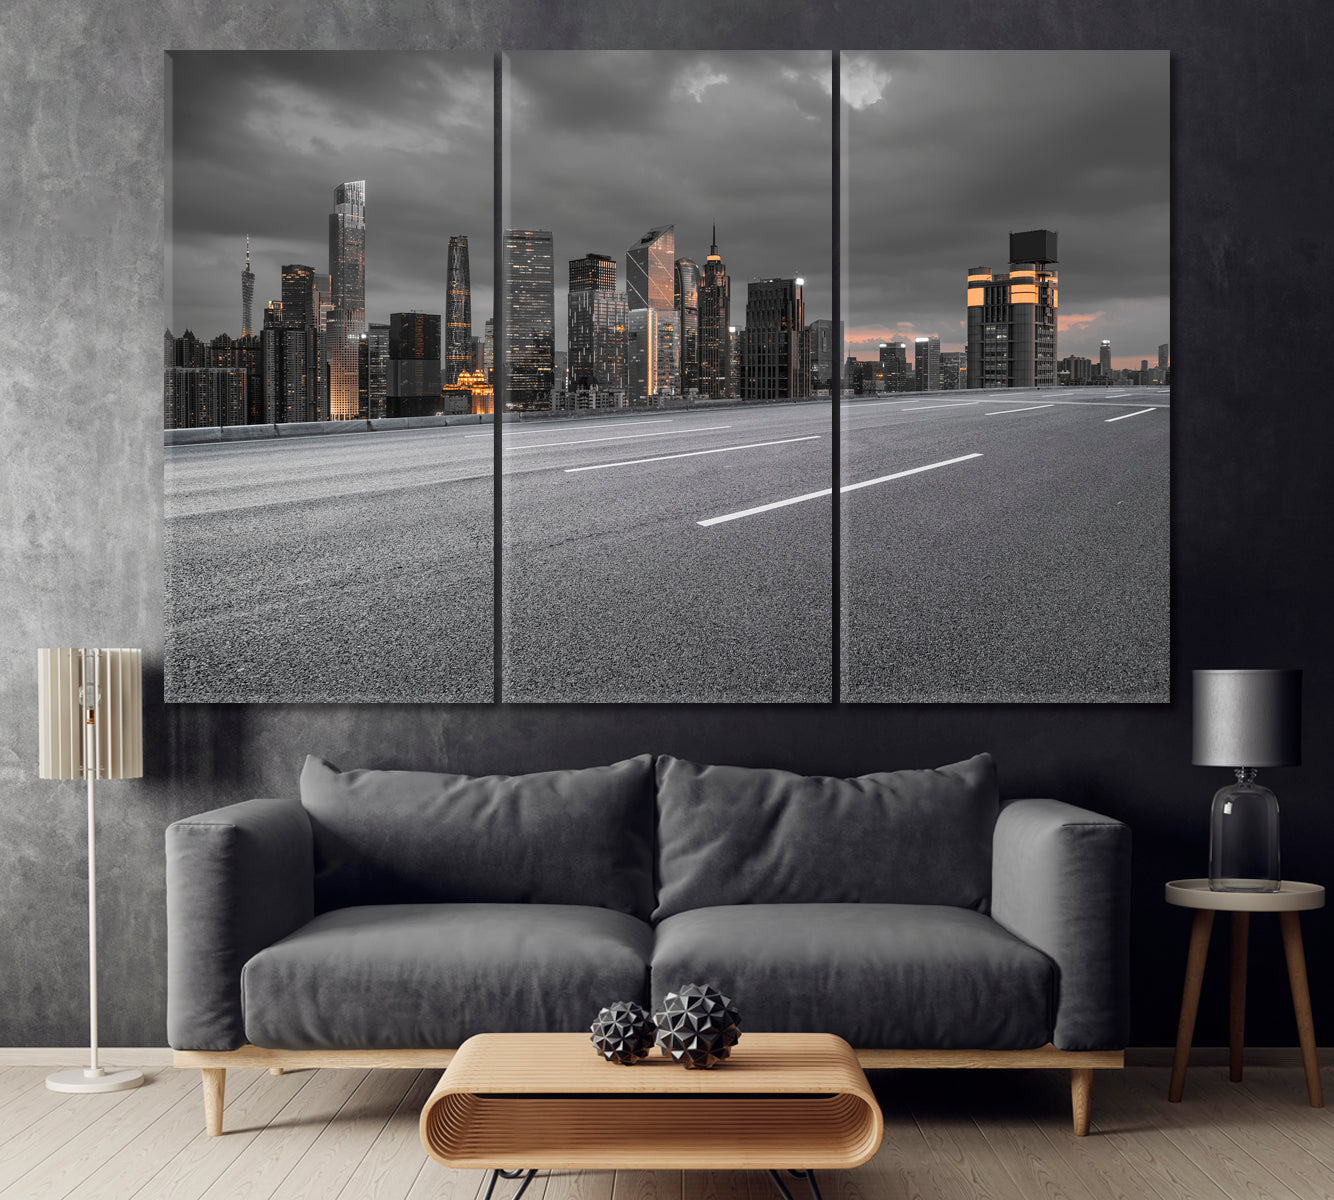 Guangzhou City Road Canvas Print ArtLexy 3 Panels 36"x24" inches 